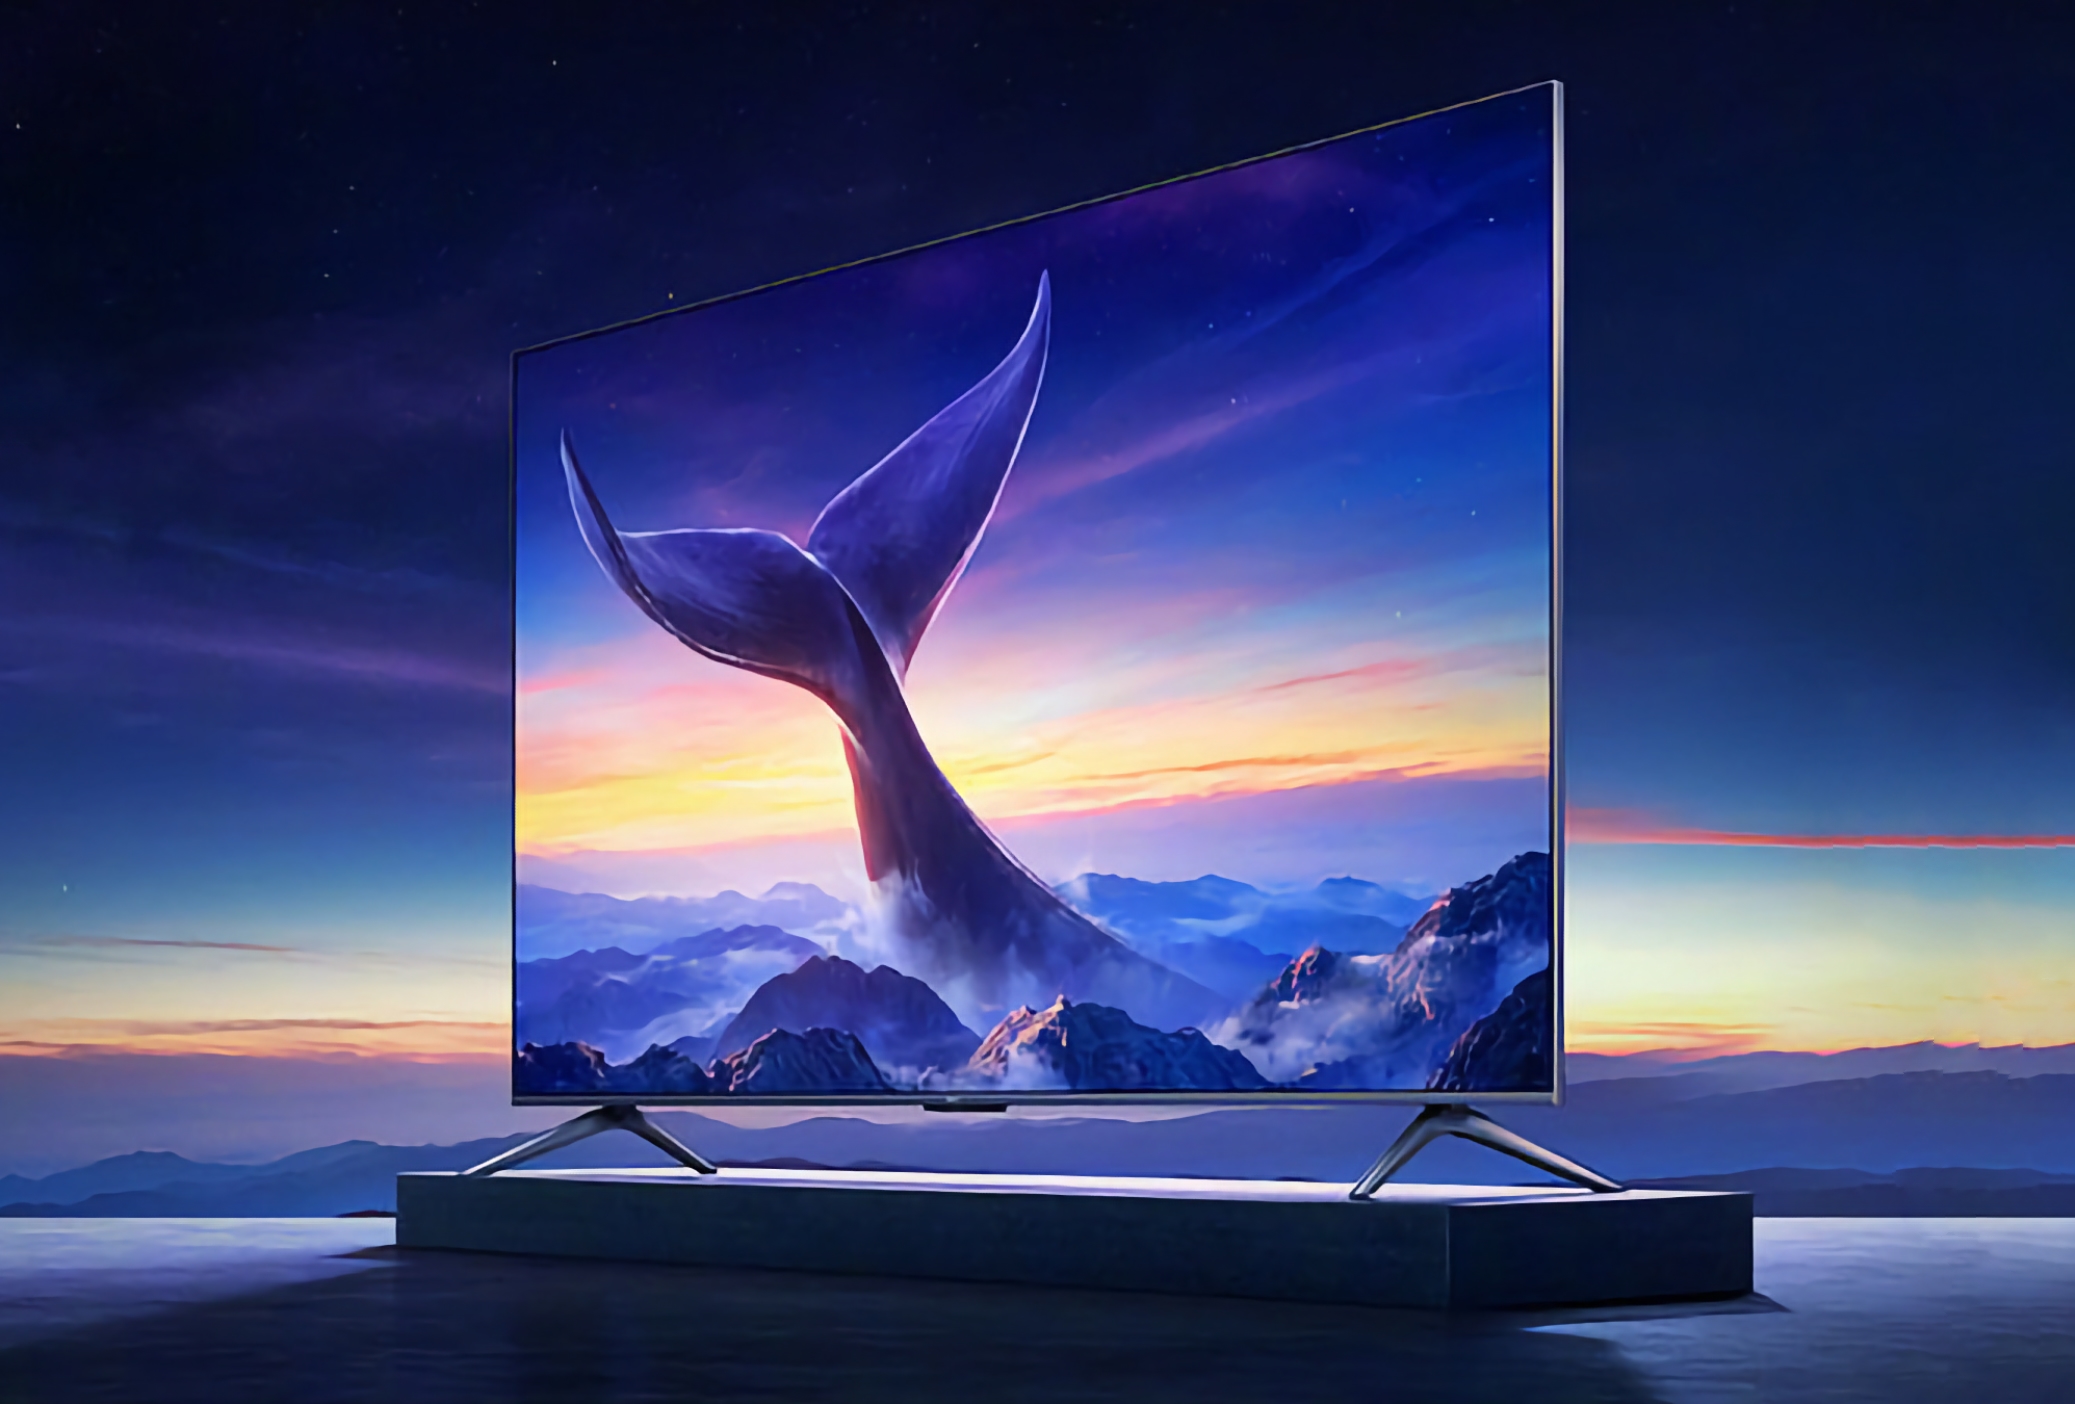 Xiaomi has unveiled the 100-inch Redmi MAX TV with 144Hz screen and HyperOS